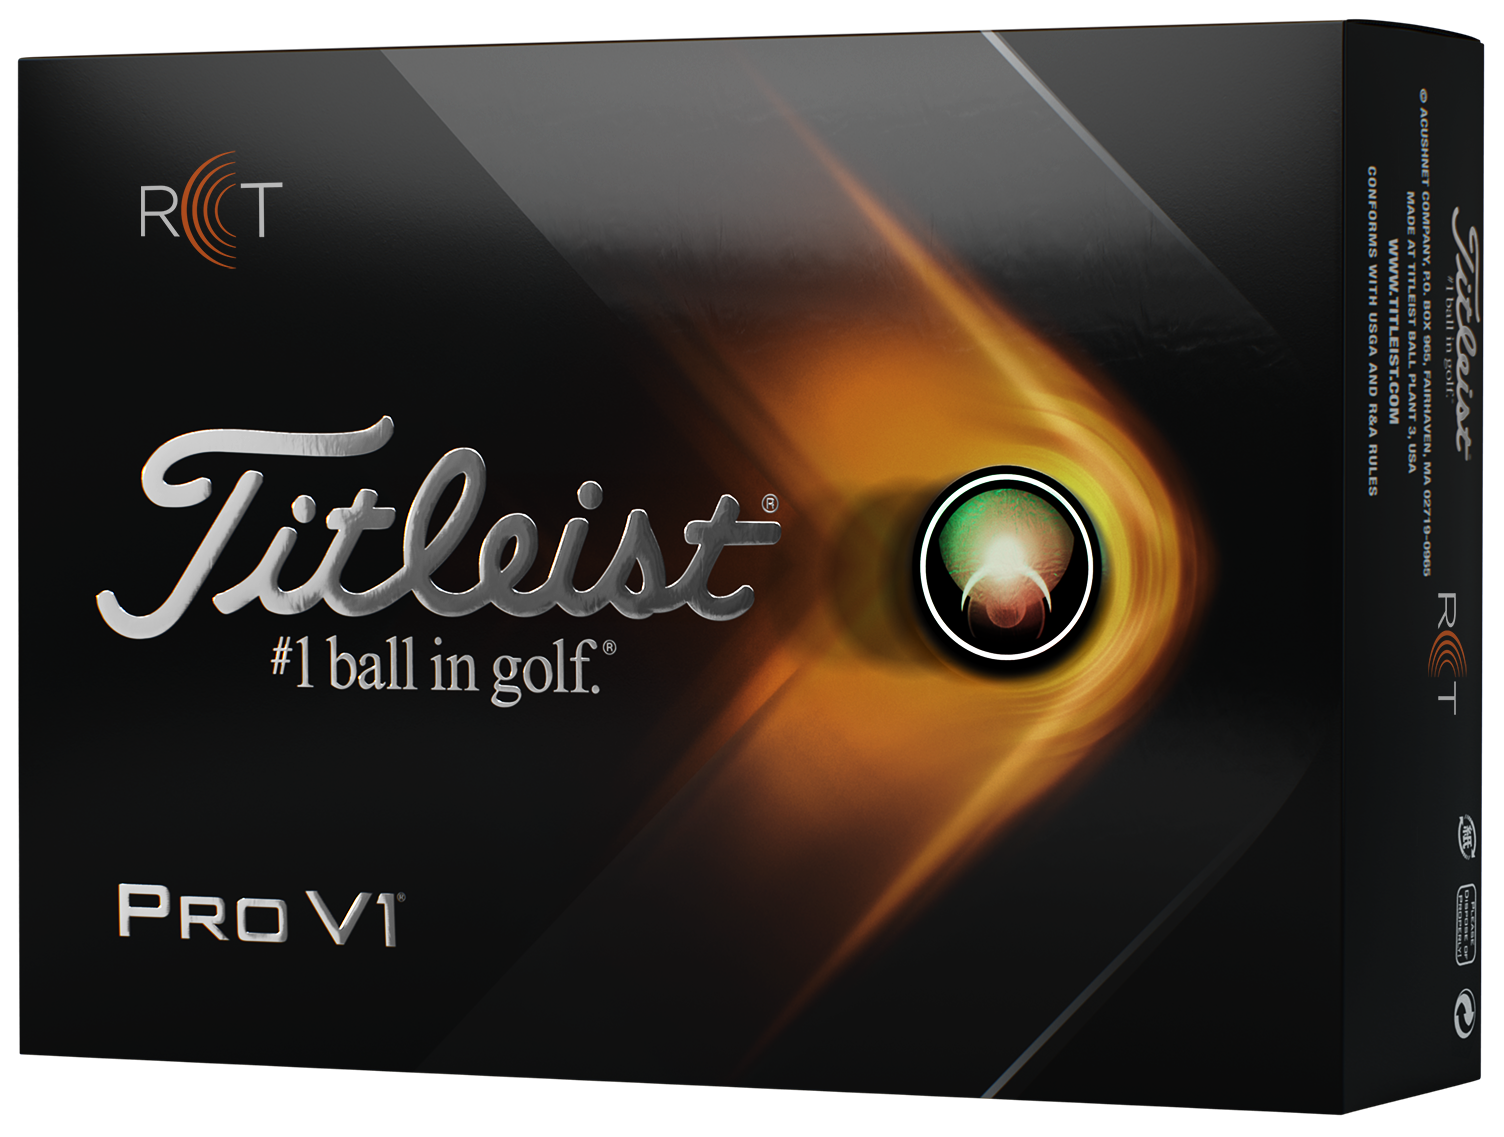 TrackMan_Virtual_league_presented_by_titleist_RTC